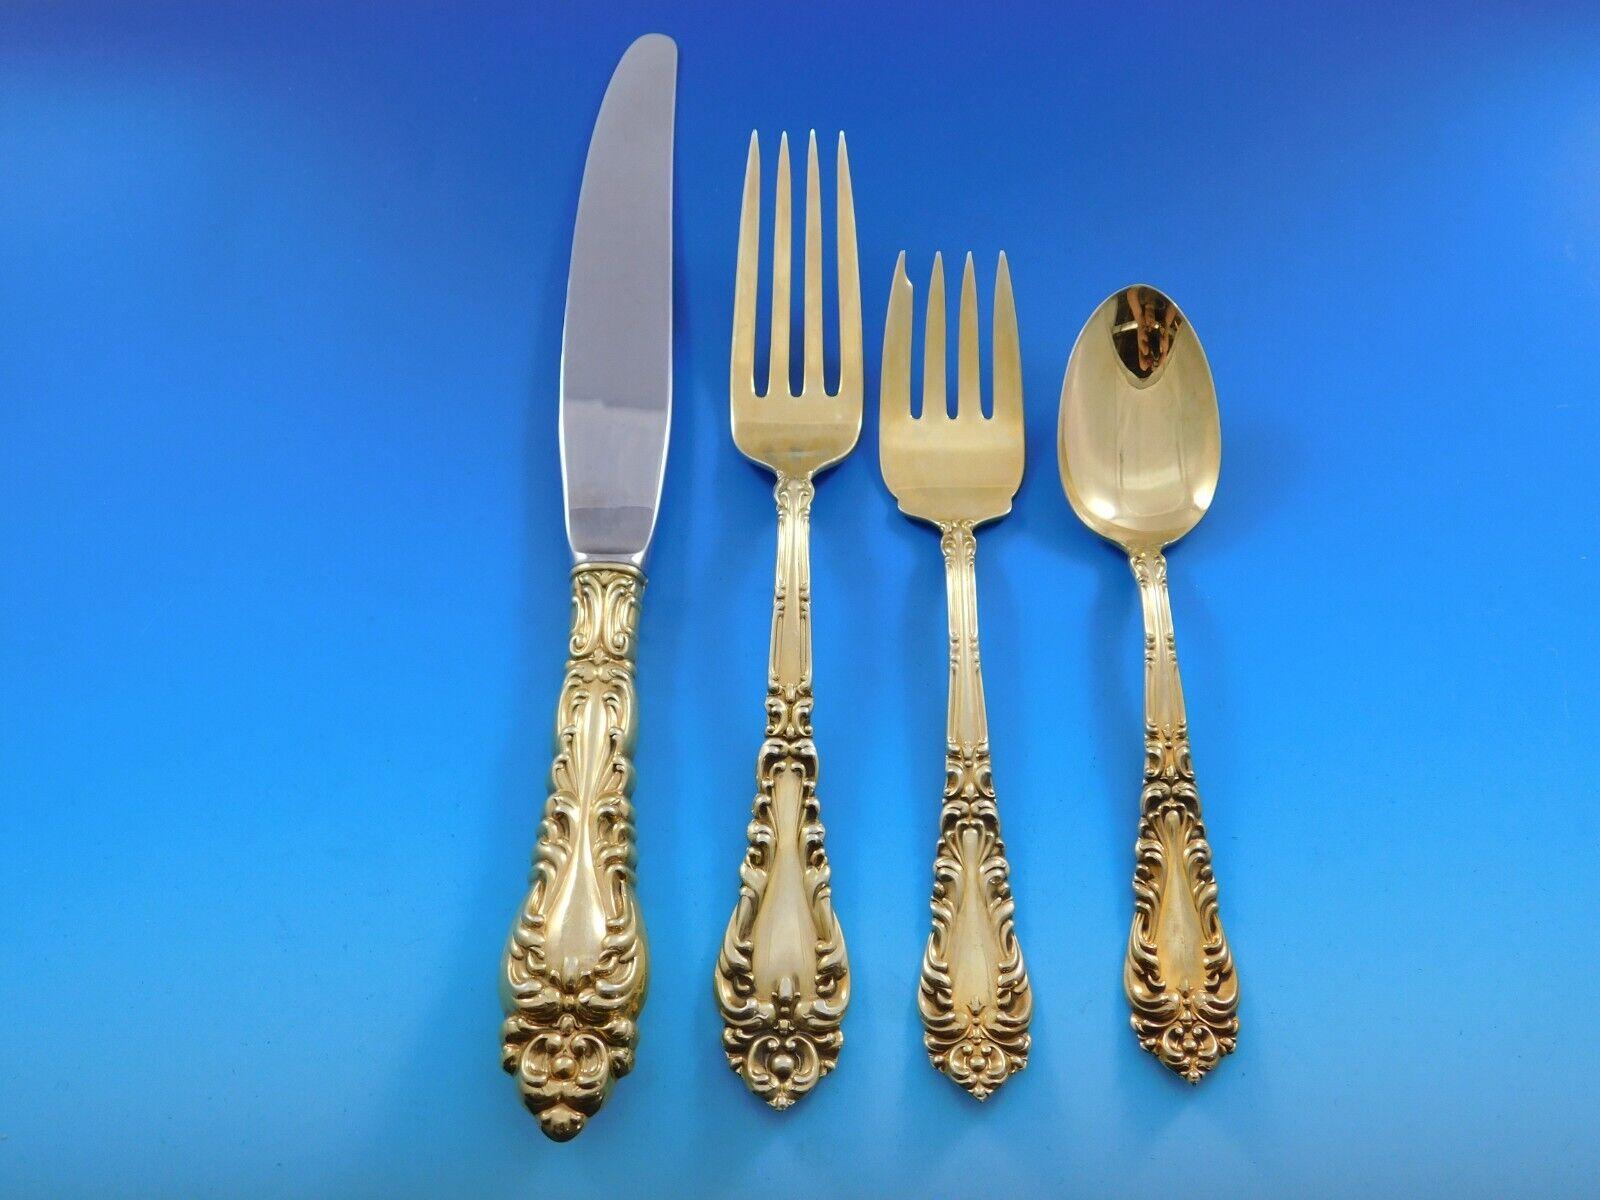 Monumental Dinner and Luncheon size Athene by Amston Gold Vermeil Sterling silver Flatware set for 12 - 171 pieces. This set includes:

12 Large Dinner Size Knives, 9 3/4